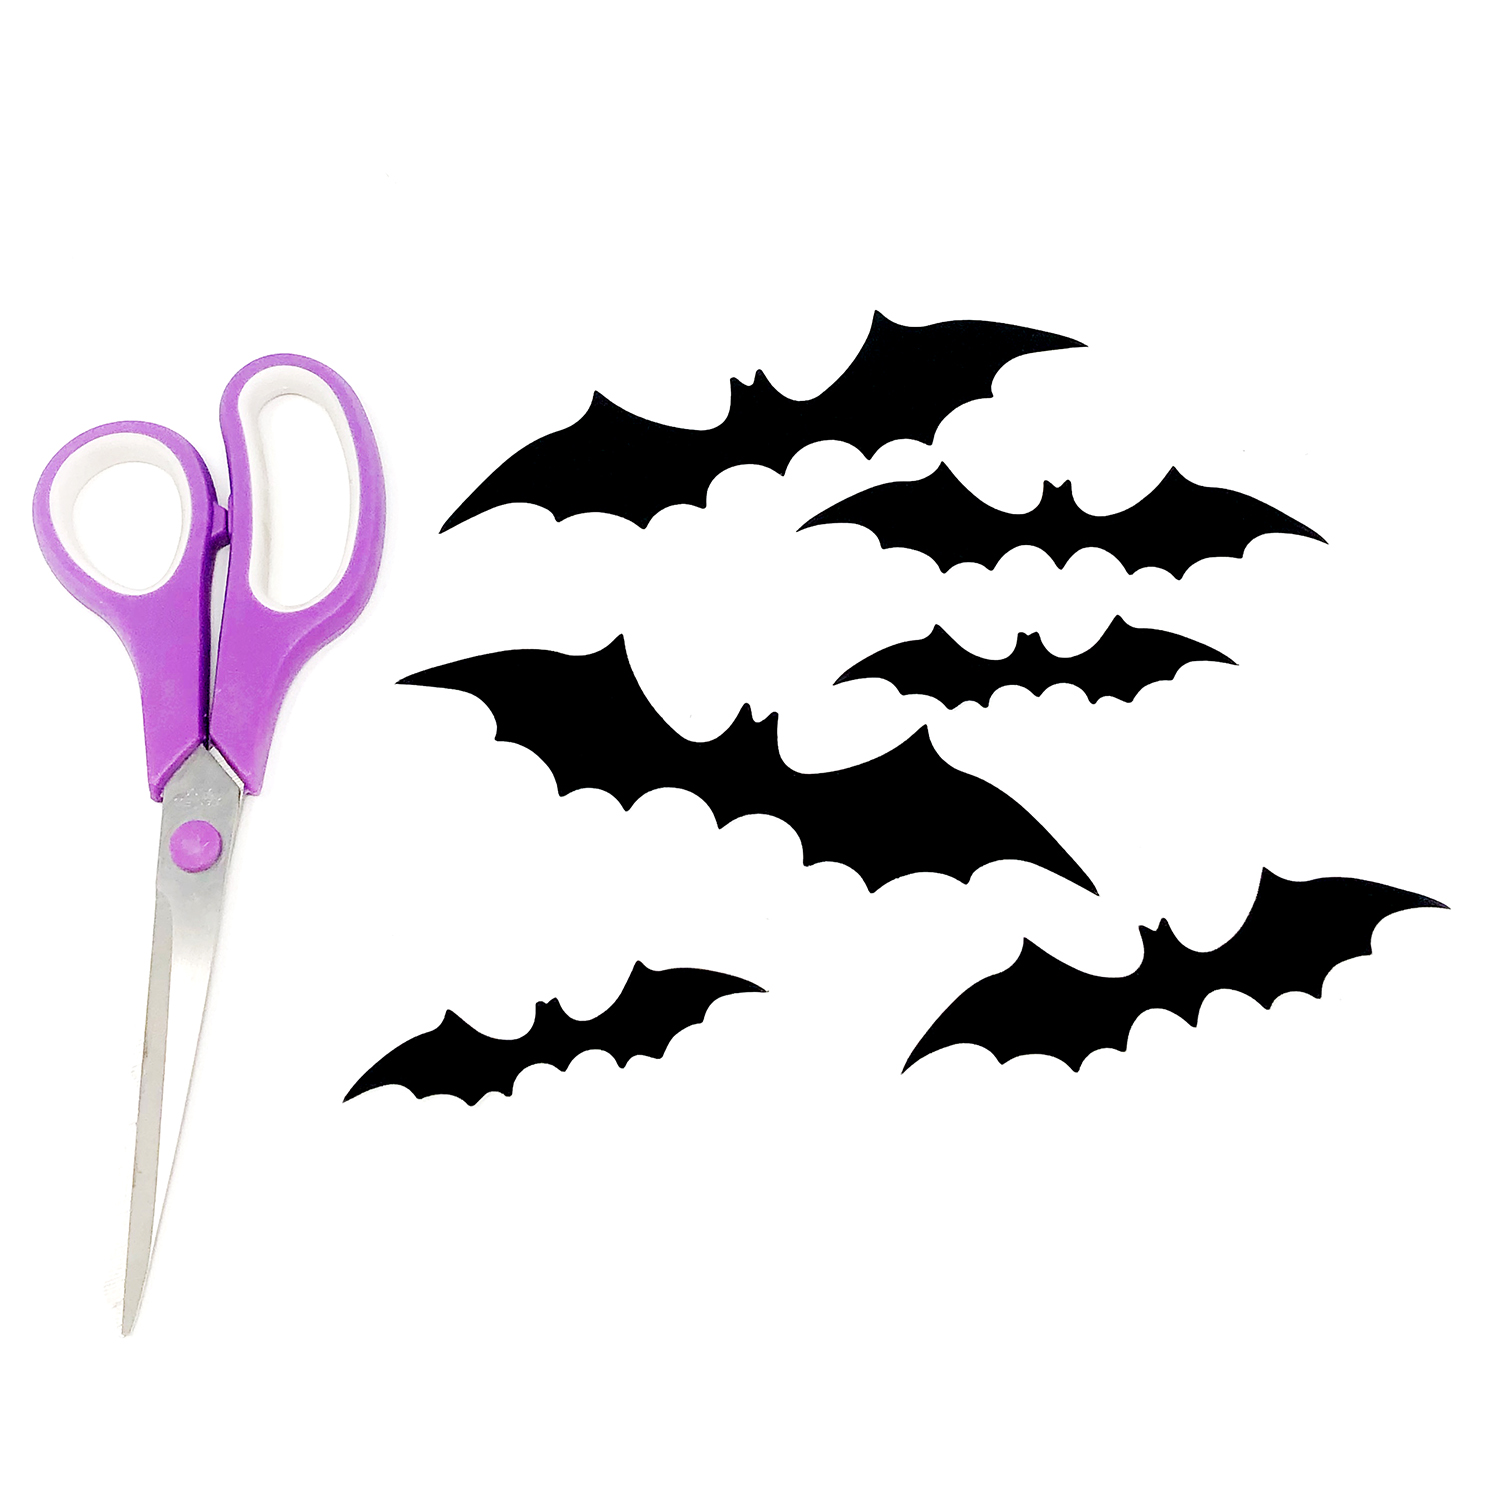 DIY Halloween Decorations by Jessica Mack on behalf of Tombow